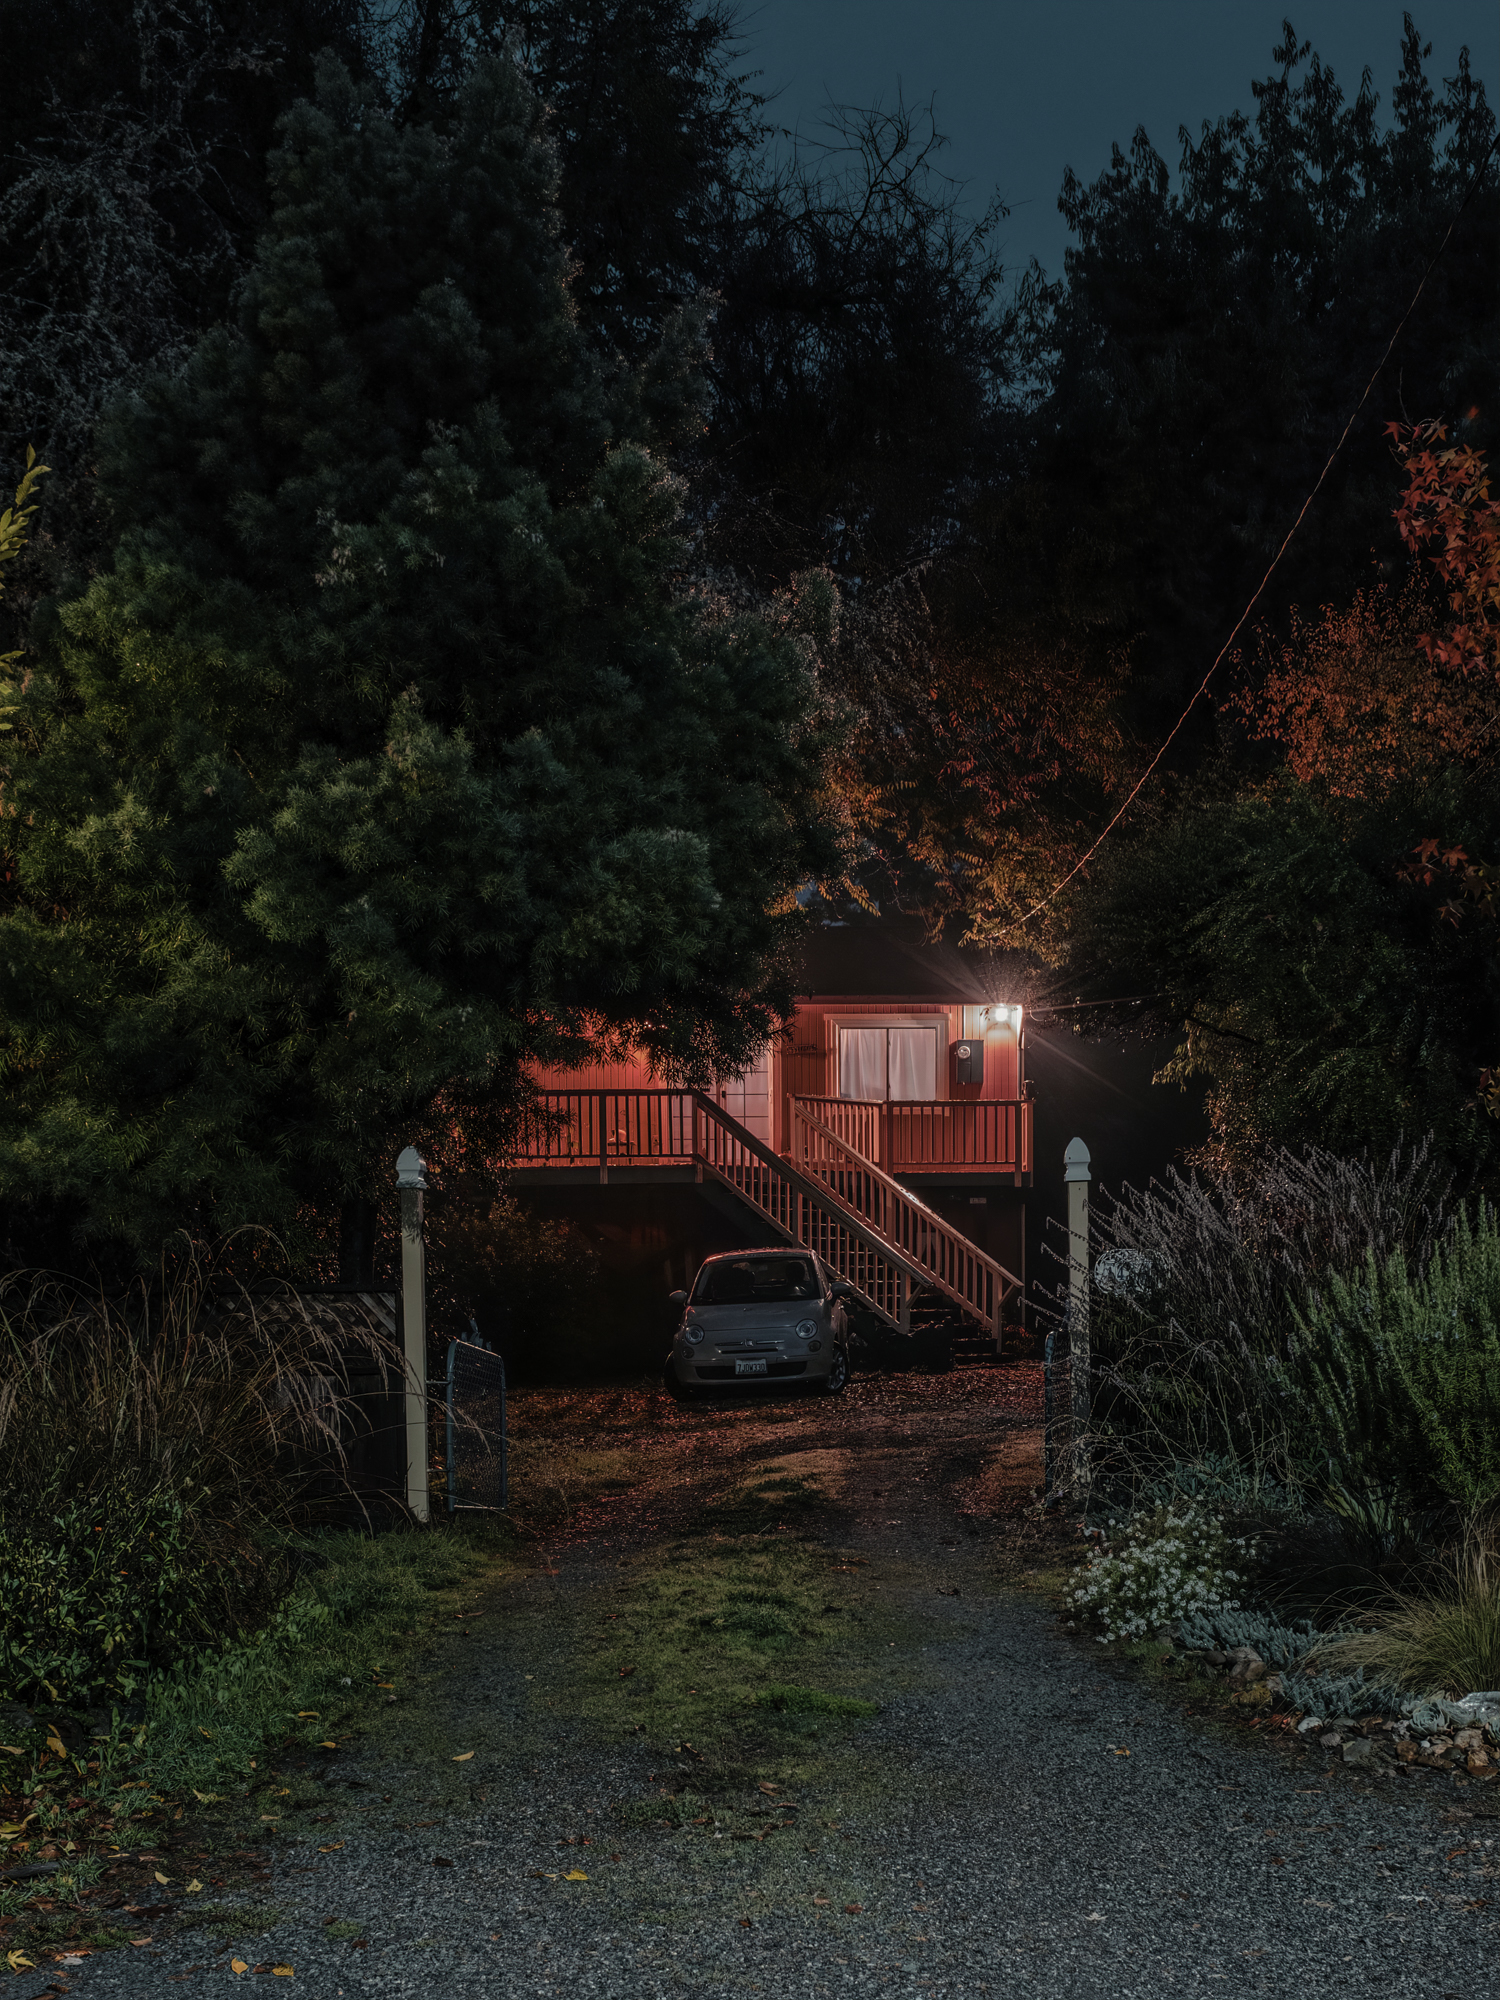    Tree House, Guerneville, CA, 2018   .  Archival Pigment Print.  30” x 40” - Limited Edition of 2 | 24” x 32” - Limited Edition of 3 | 18” x 24” - Limited Edition of 5  Pricing &amp; Purchase Info:  Leon Gallery  